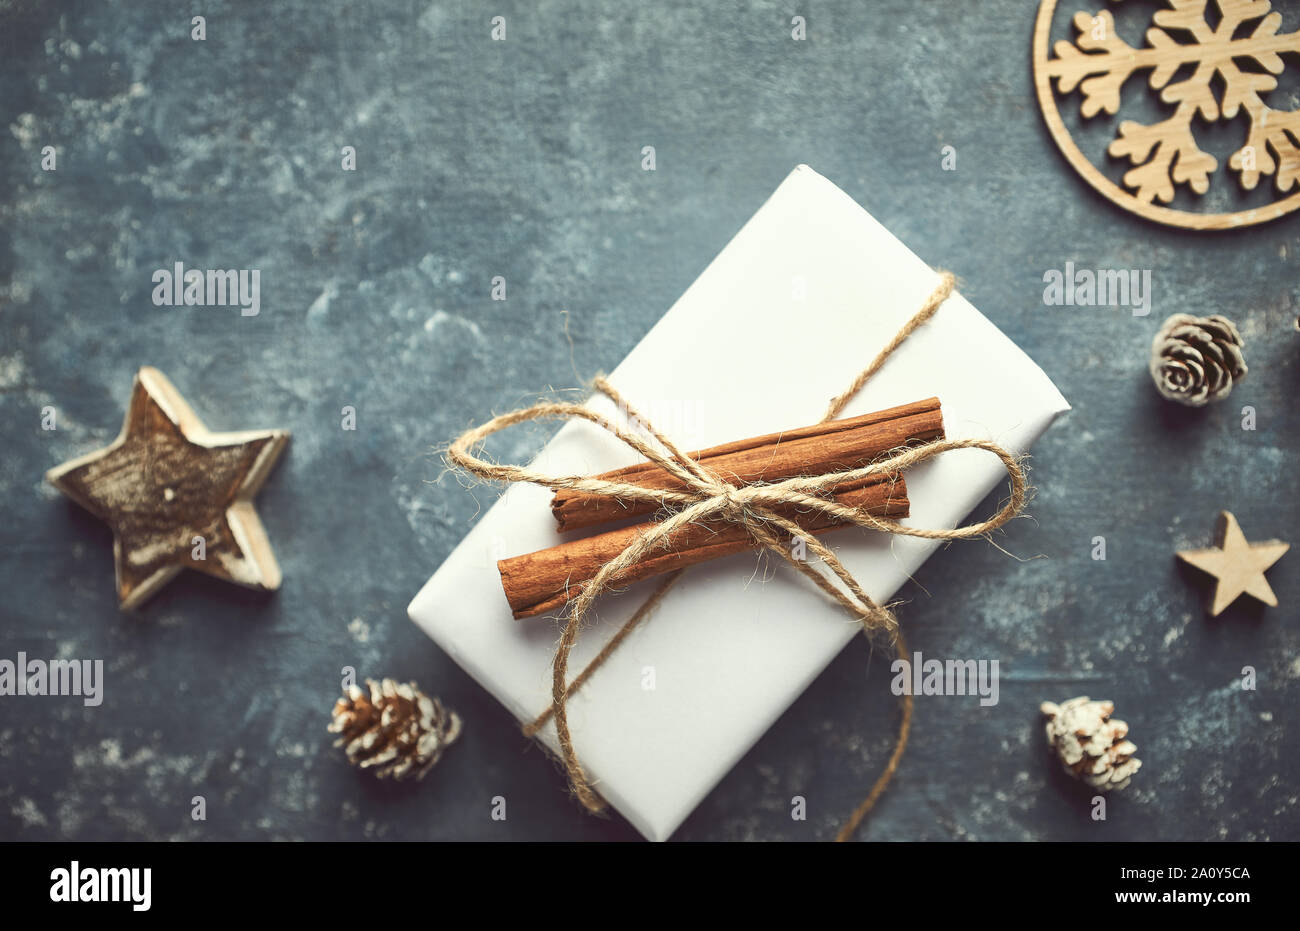 Christmas present decorated with cinnamon sticks on gray background. Copy space. Flat lay Stock Photo